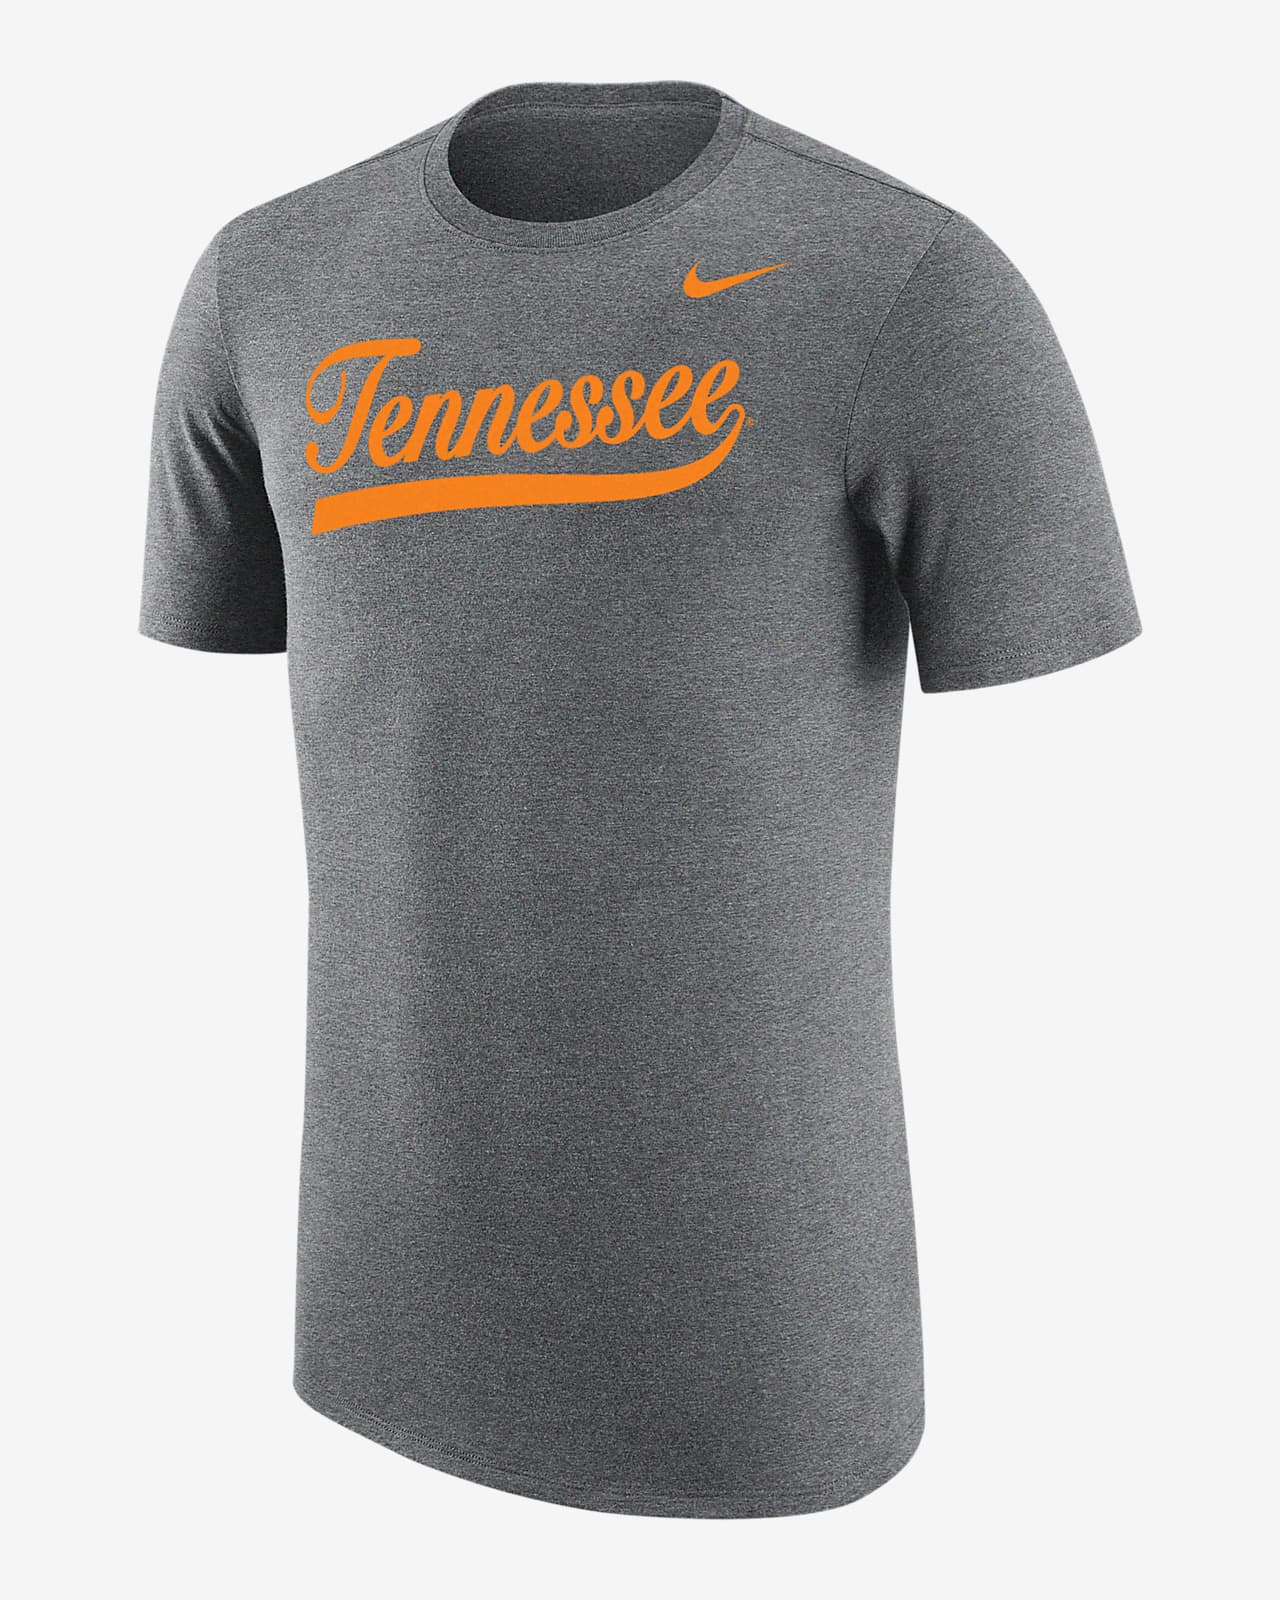 Tennessee Men's Nike College T-Shirt